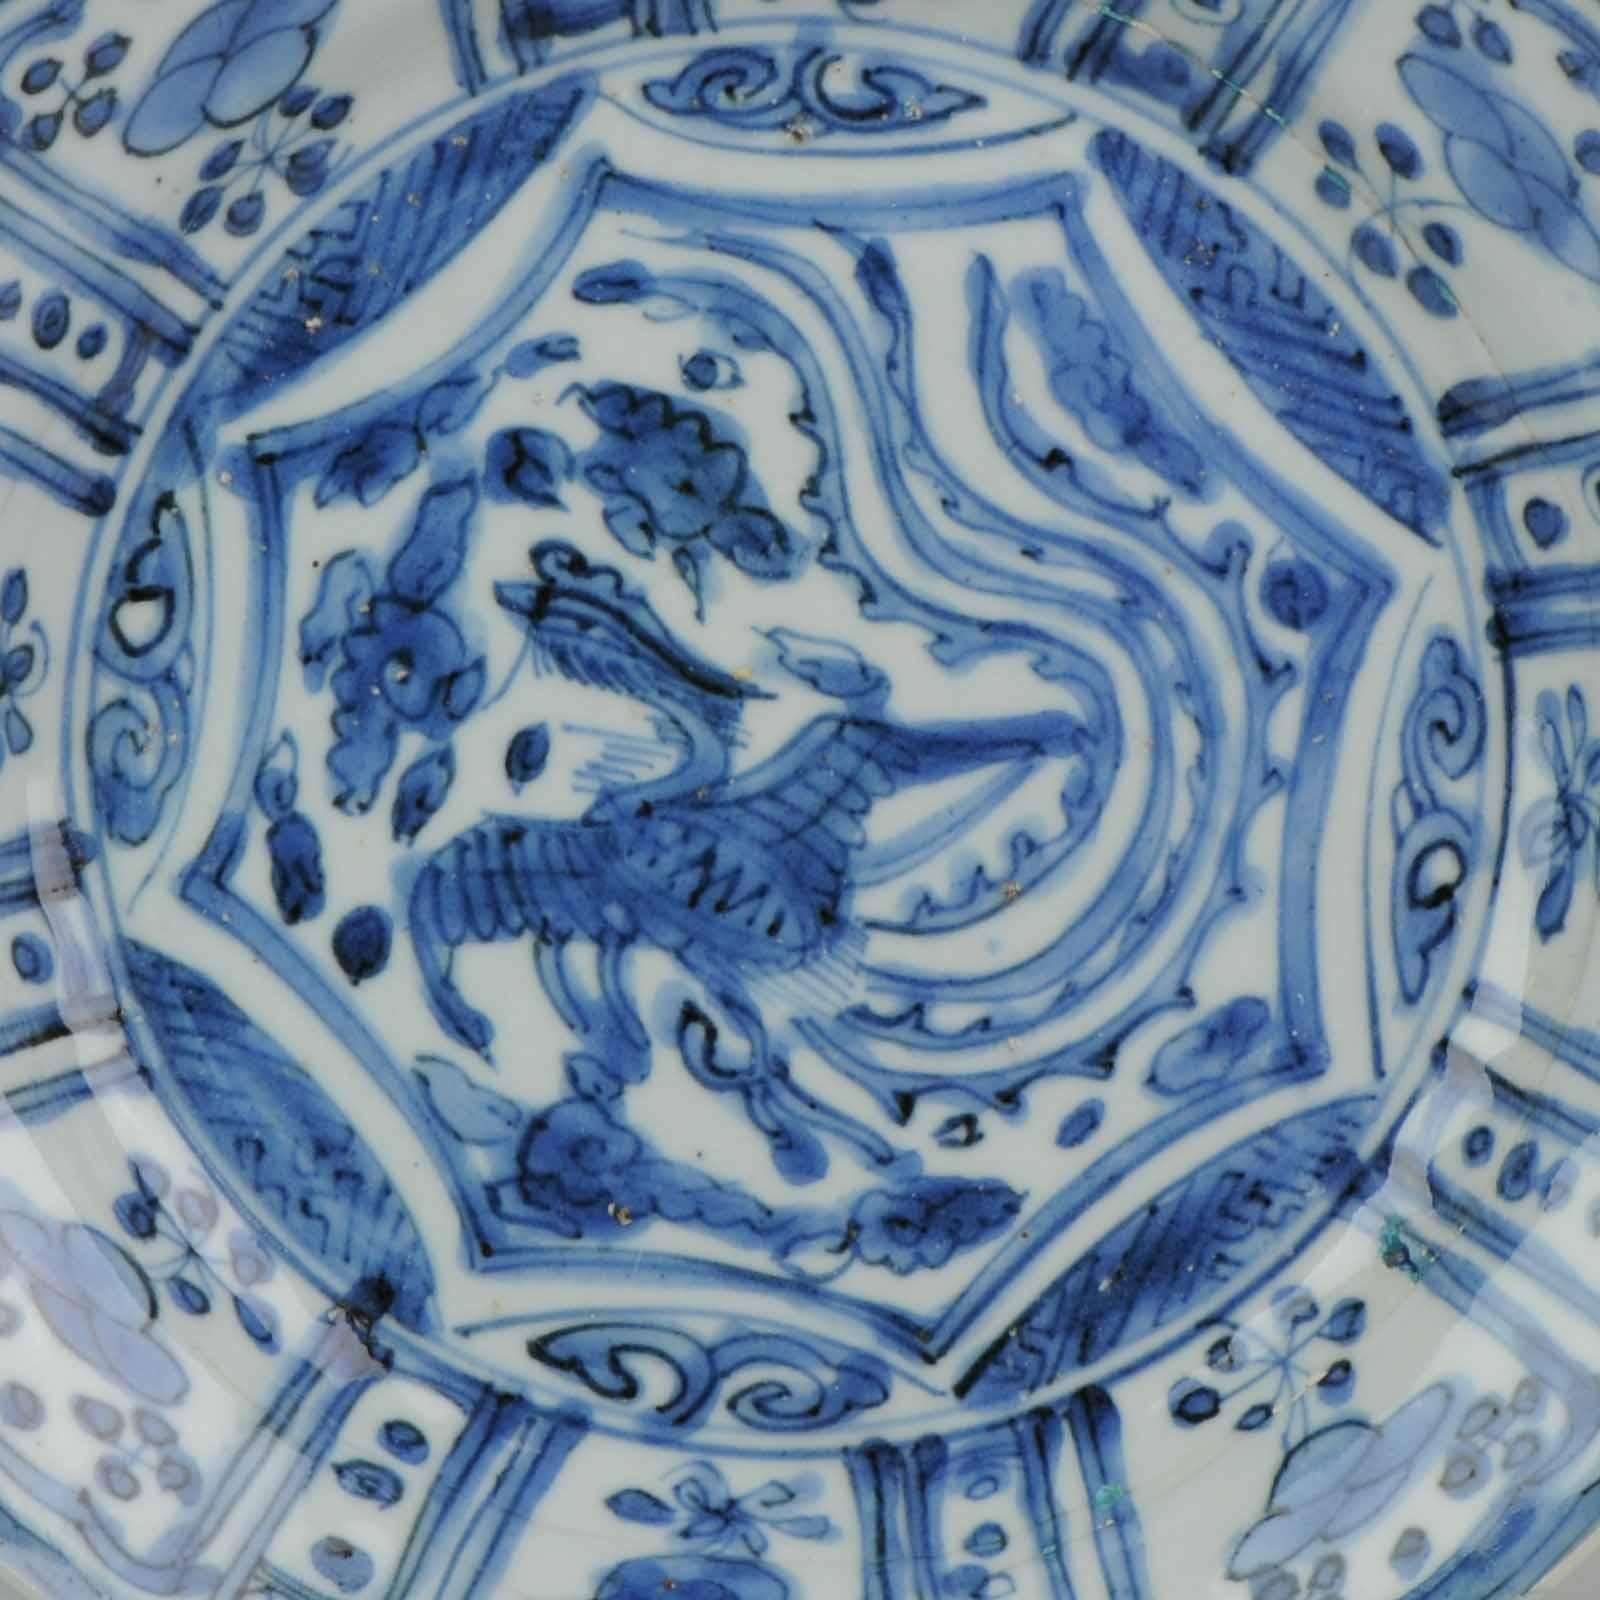 A very nice kraak dish of a desirable cobalt color blue! Stunning piece with beautiful paintwork.

The scene of a phoenix is quite uncommon on Kraak porcelain. The phoenix is the symbol of the Empress.
Very nice. In beautiful display